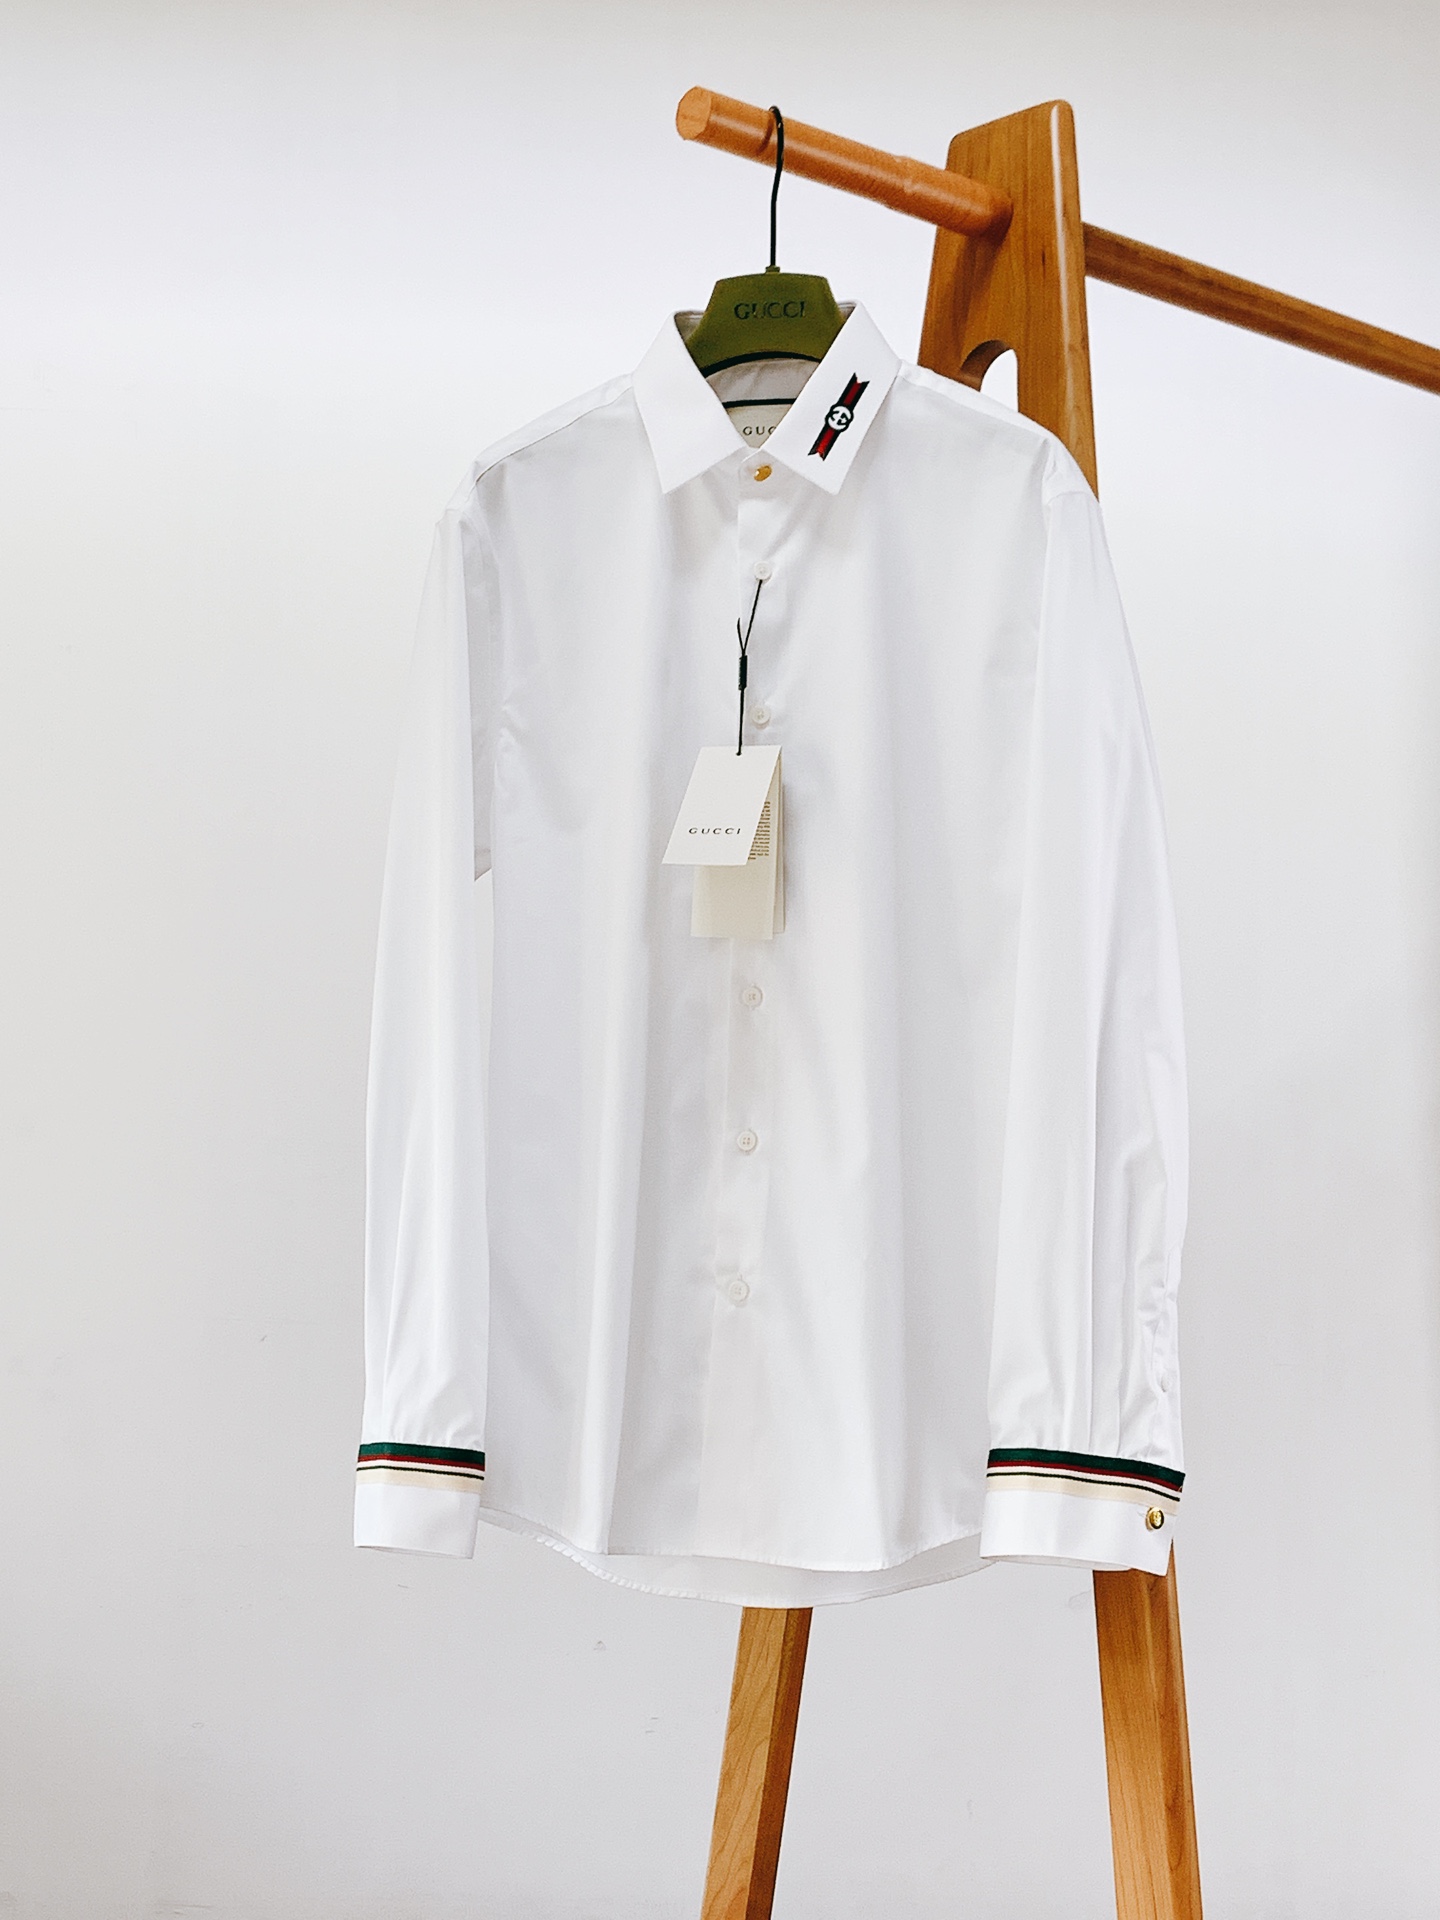 Gucci Clothing Shirts & Blouses Spring/Summer Collection Fashion Casual